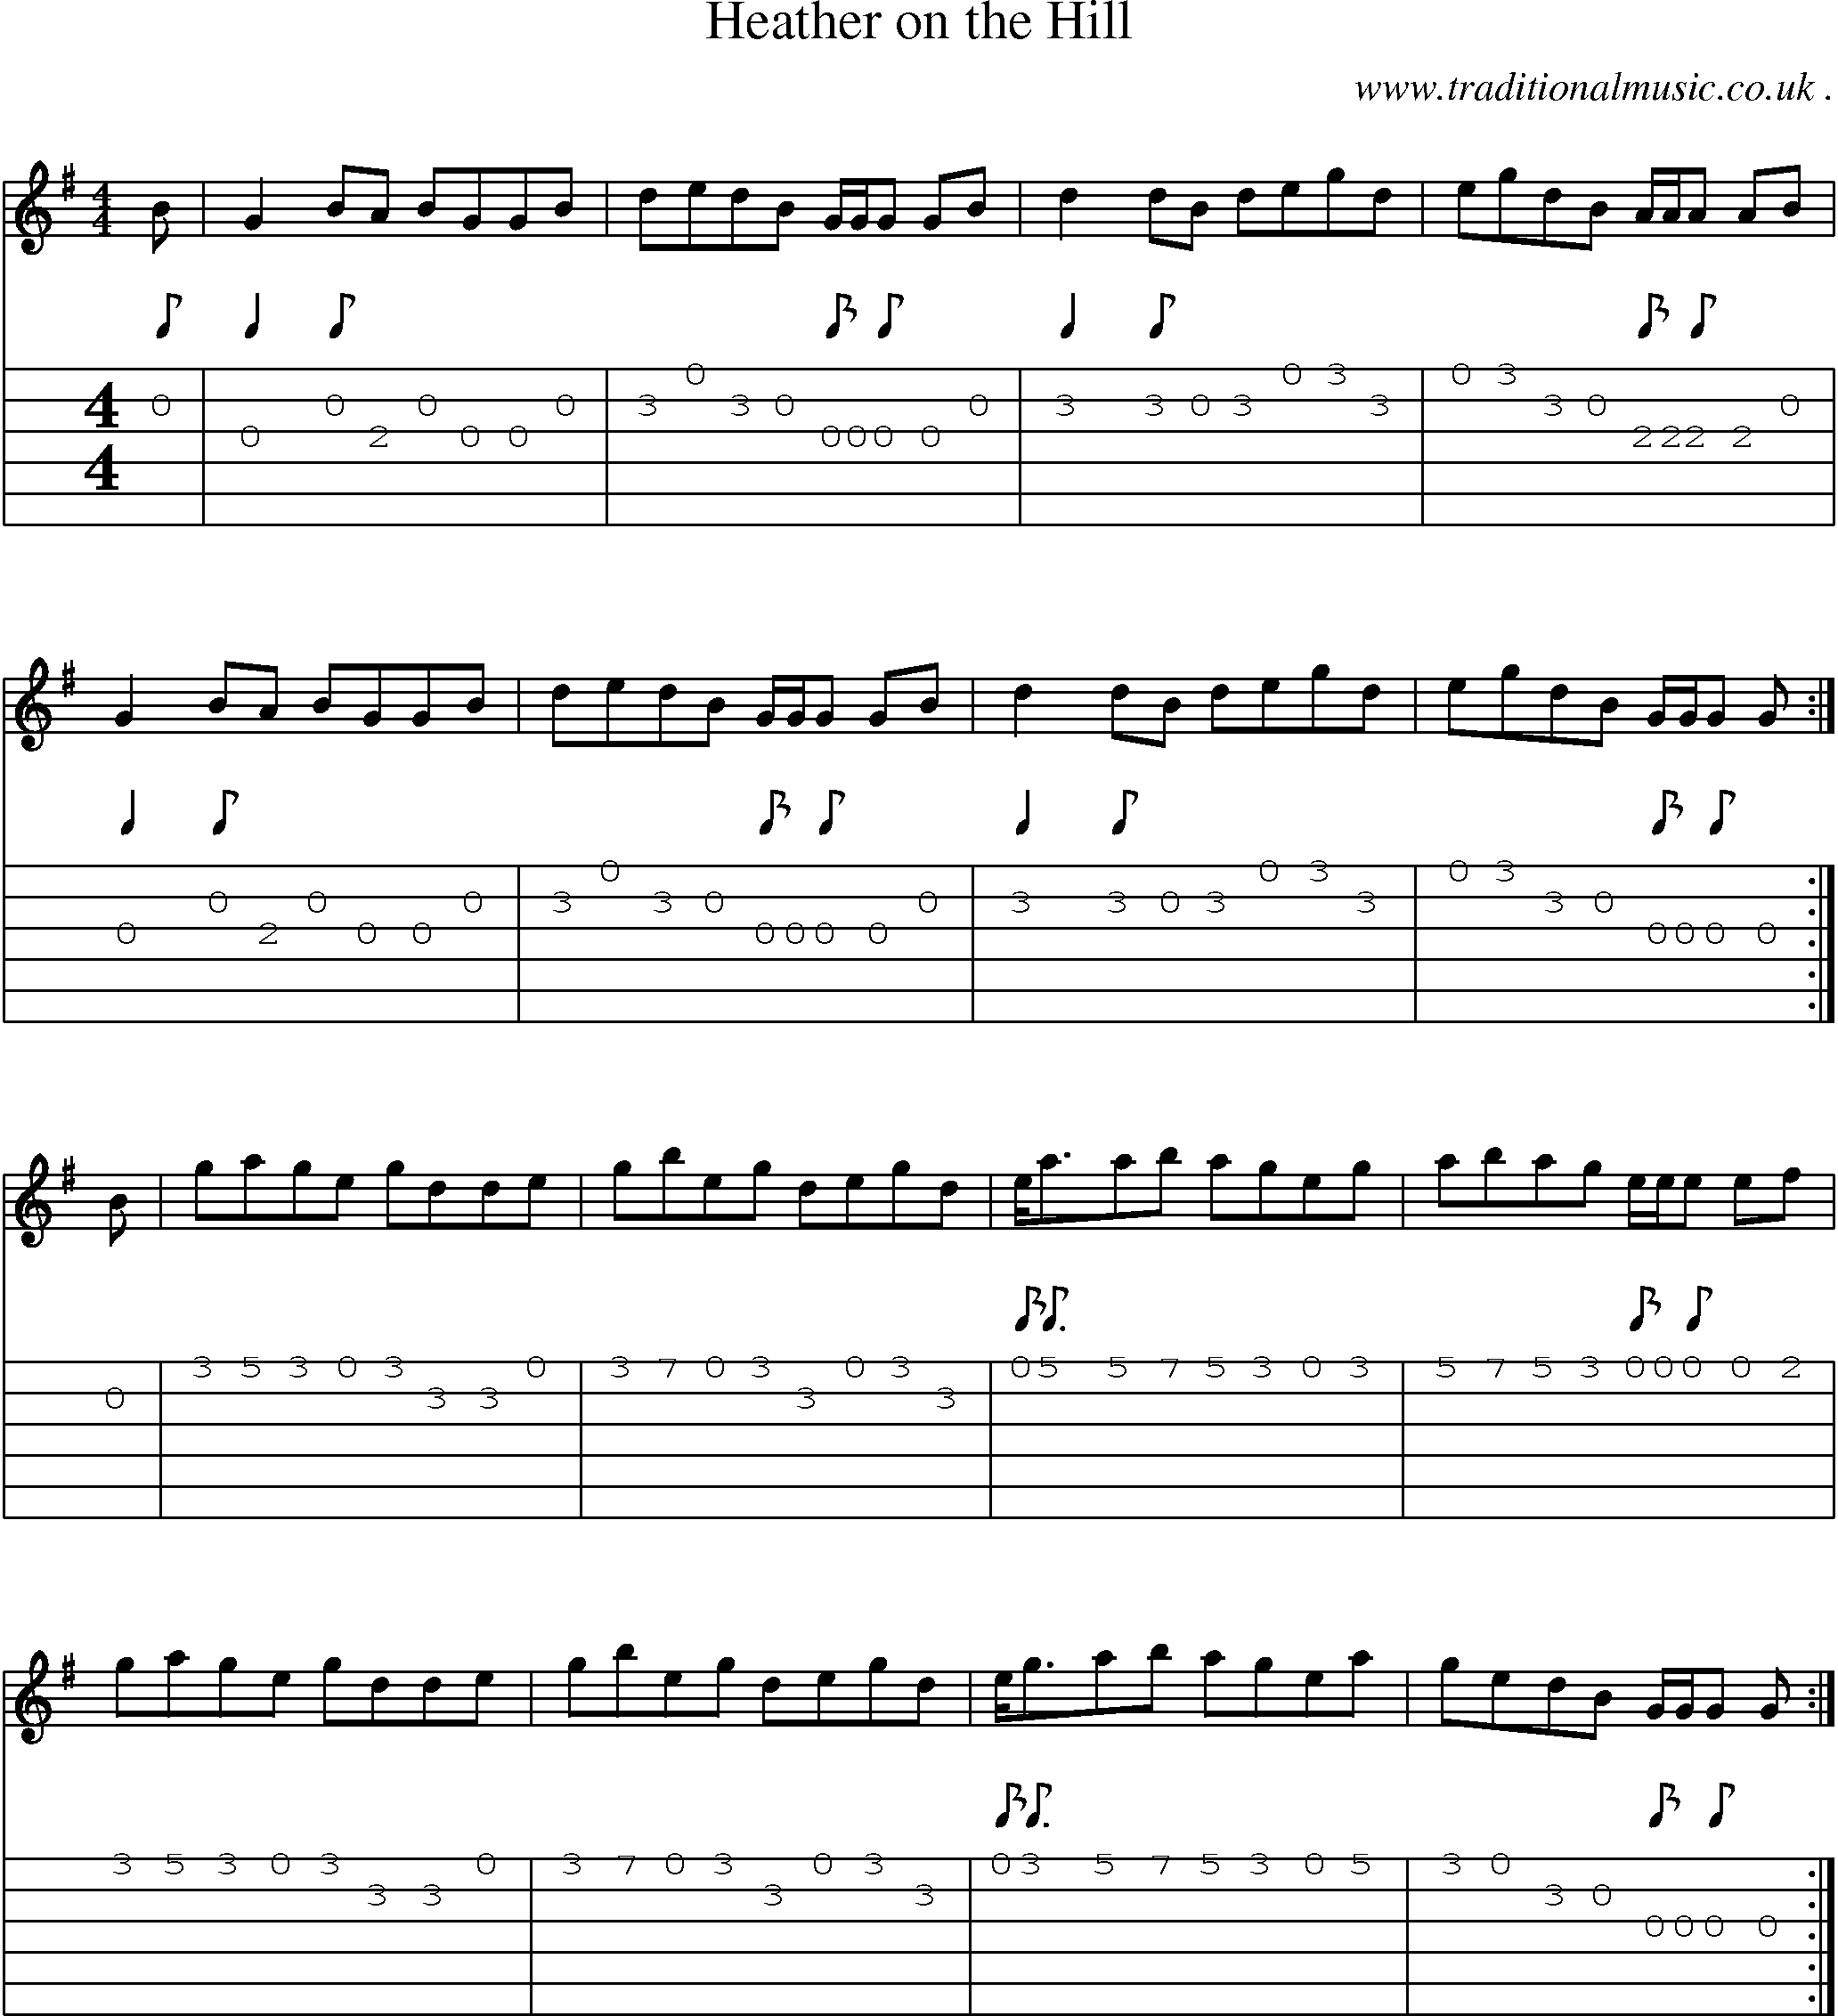 Sheet-music  score, Chords and Guitar Tabs for Heather On The Hill